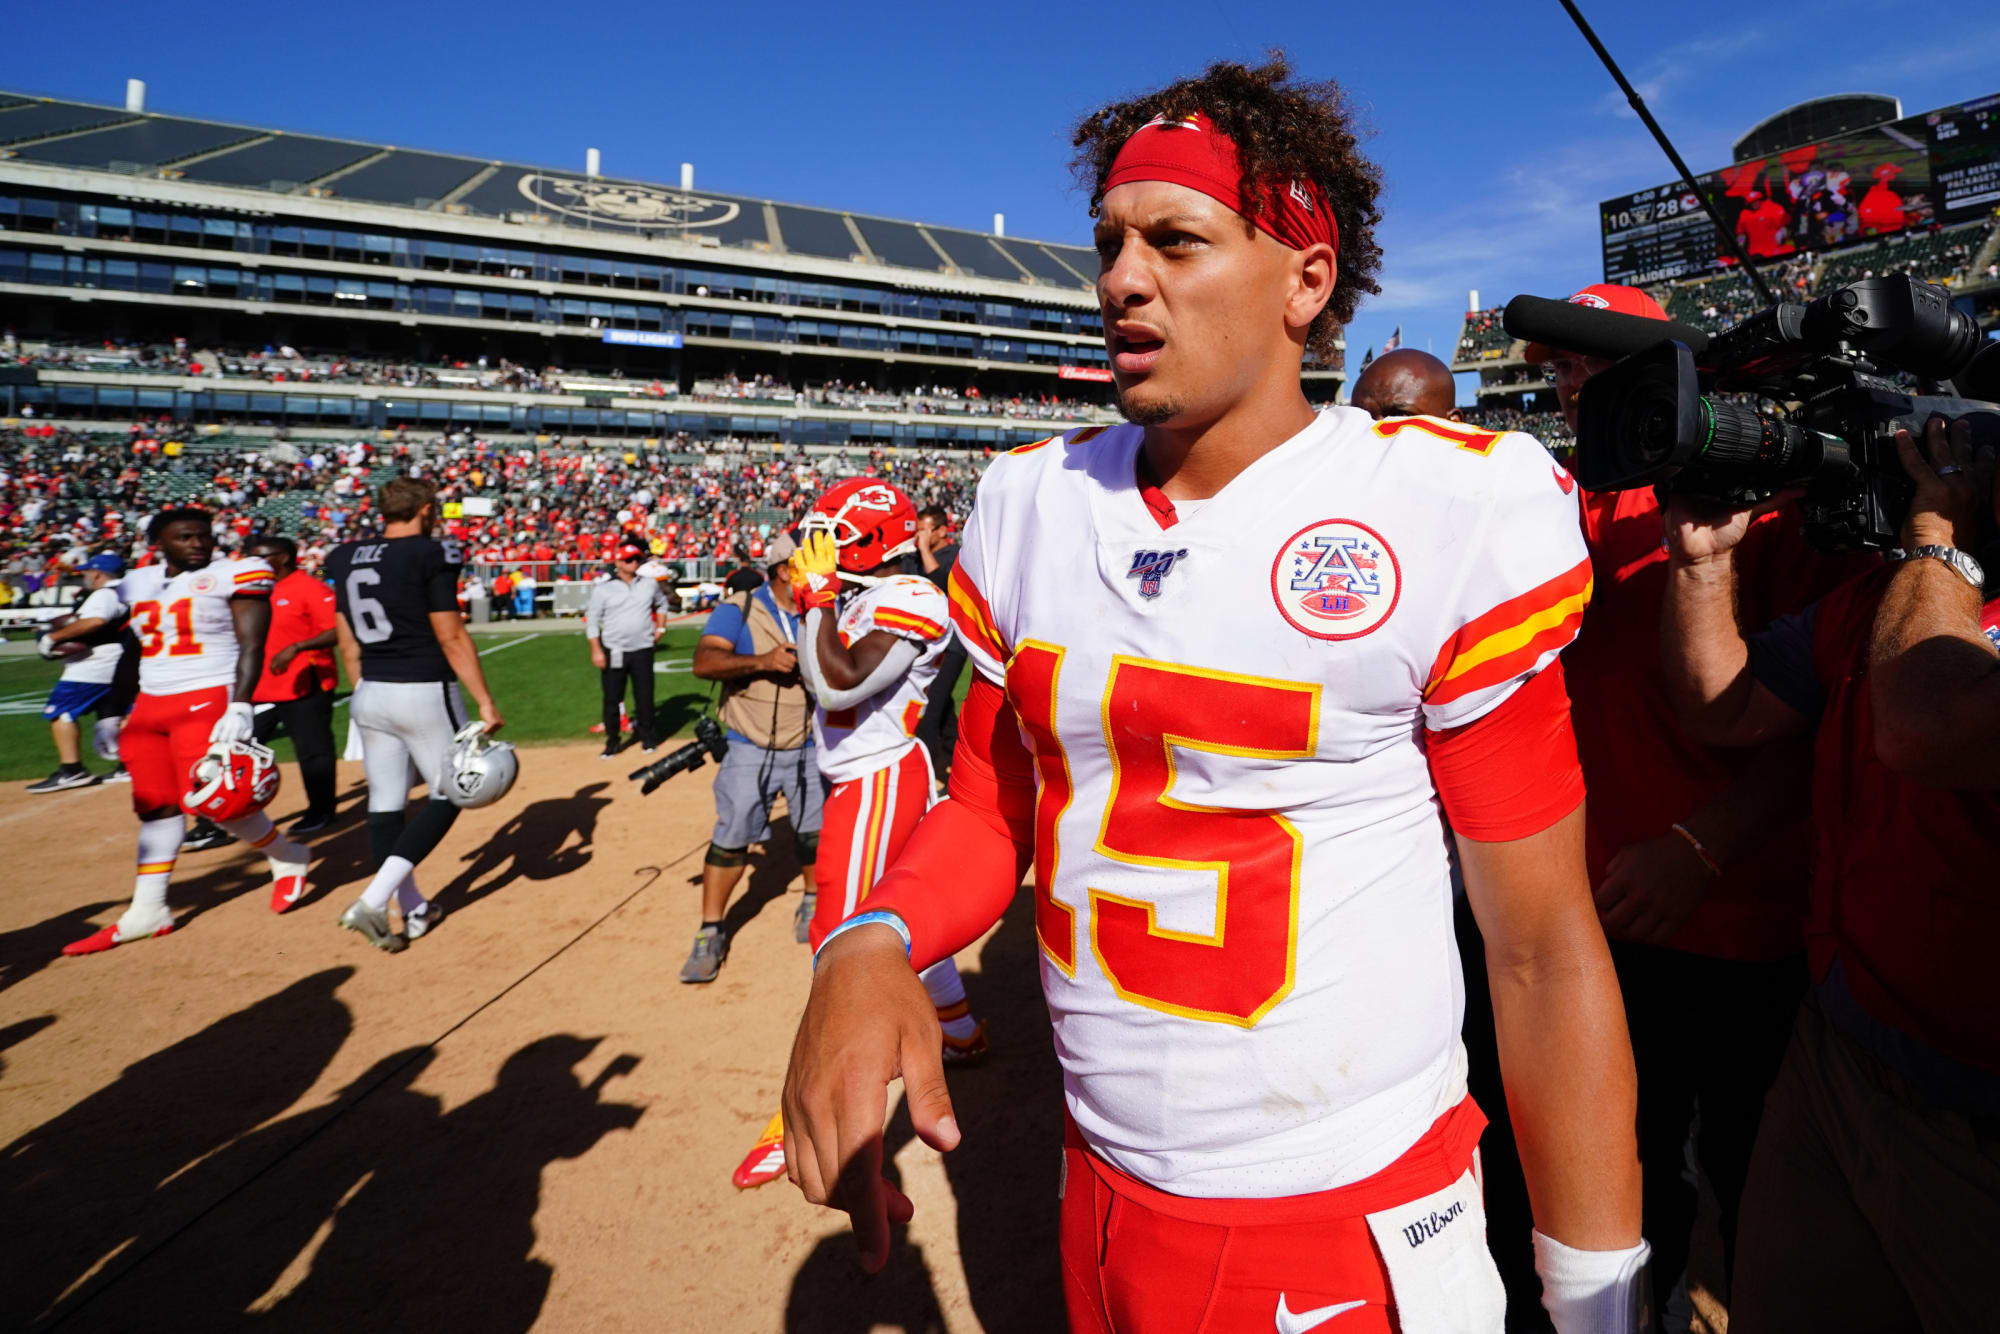 Patrick Mahomes, Russell Wilson named NFL's offensive players of the week